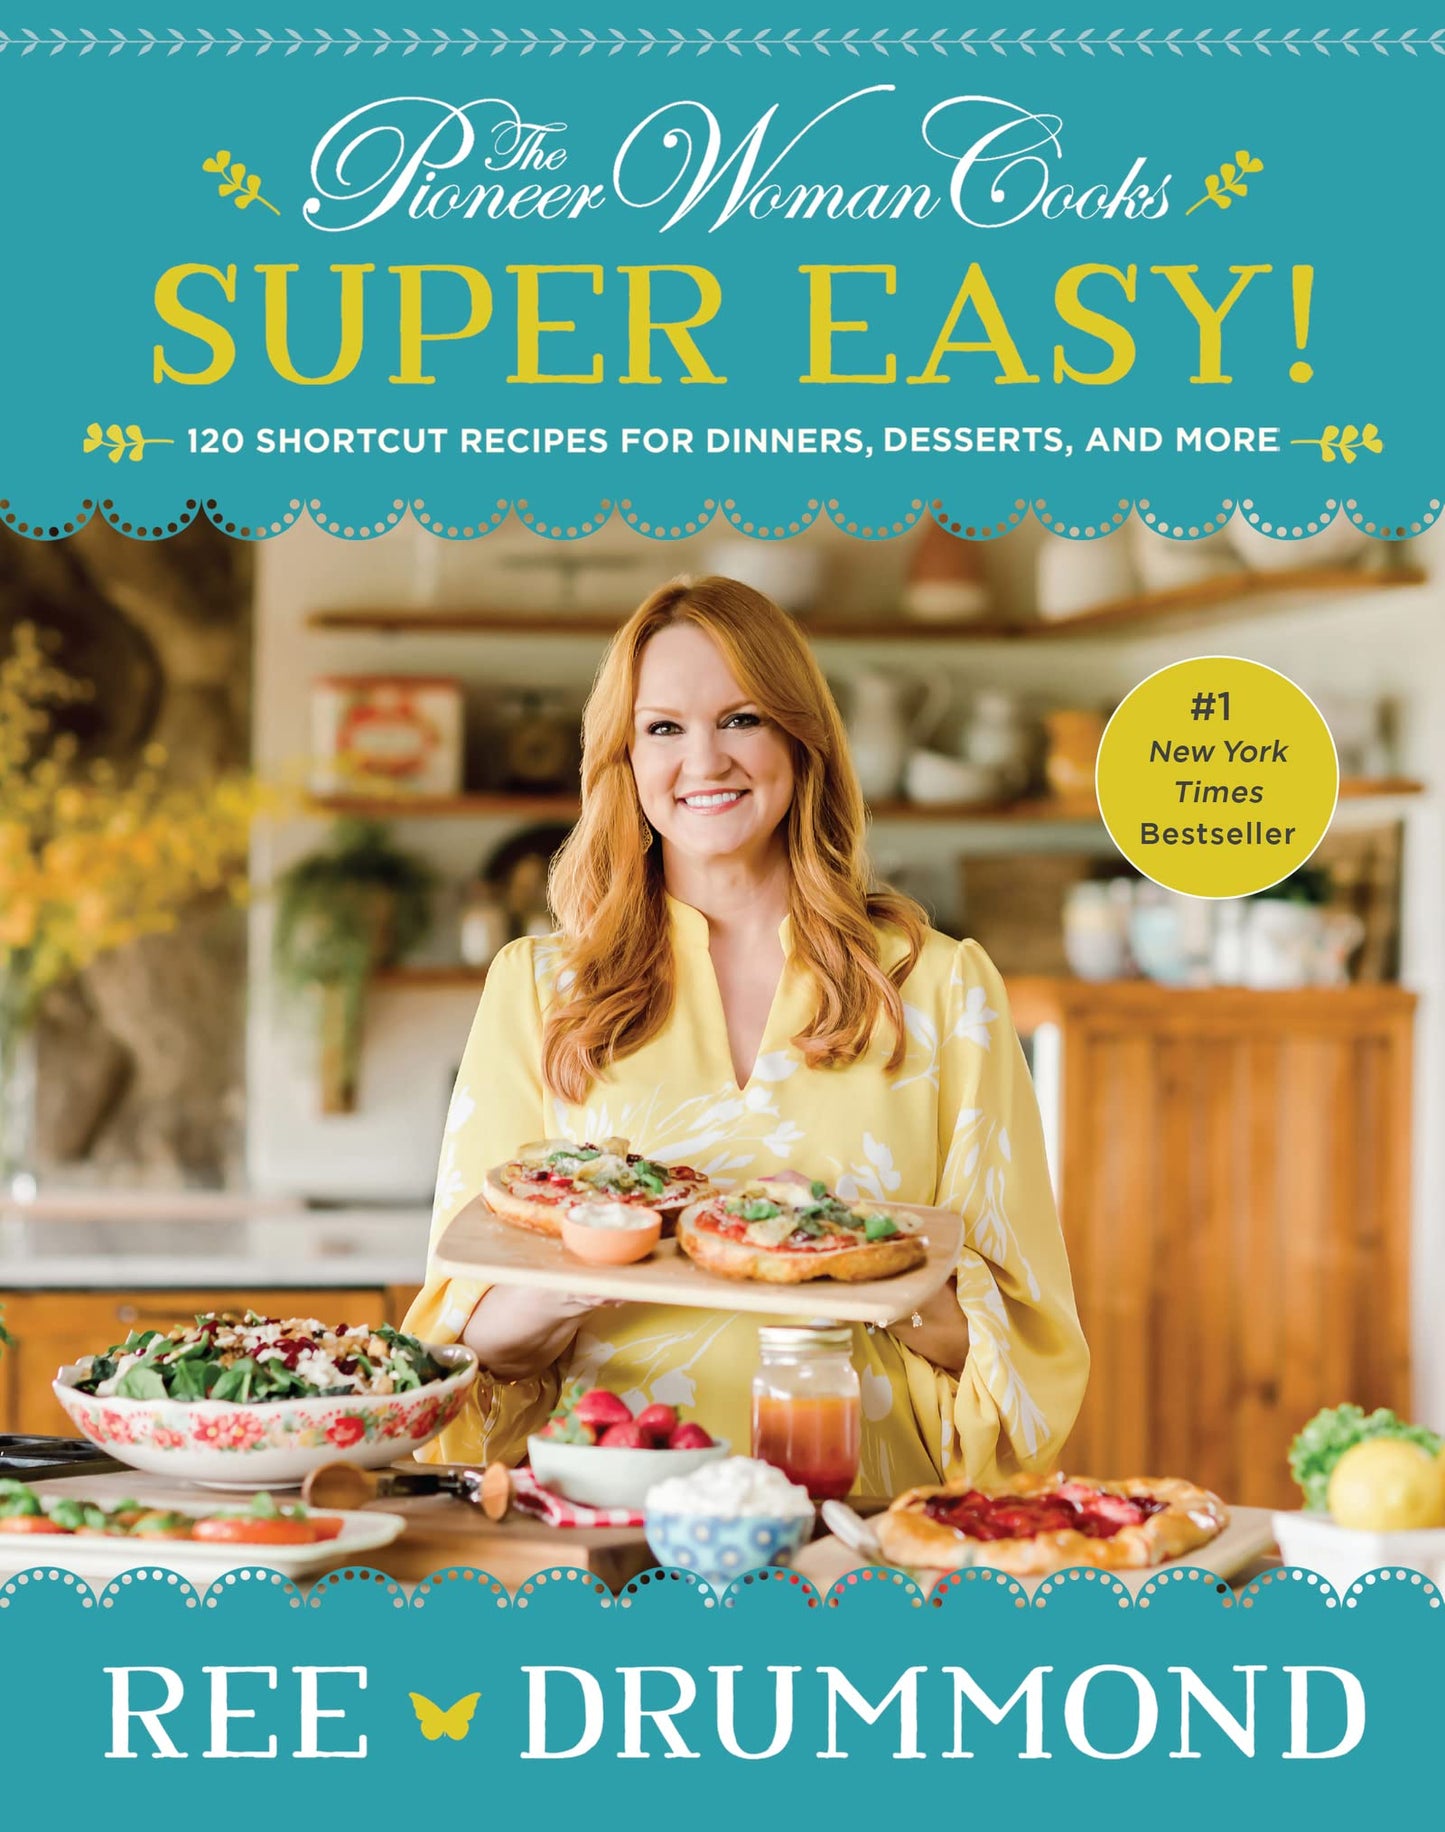 The Pioneer Woman Cooks "Super Easy!"